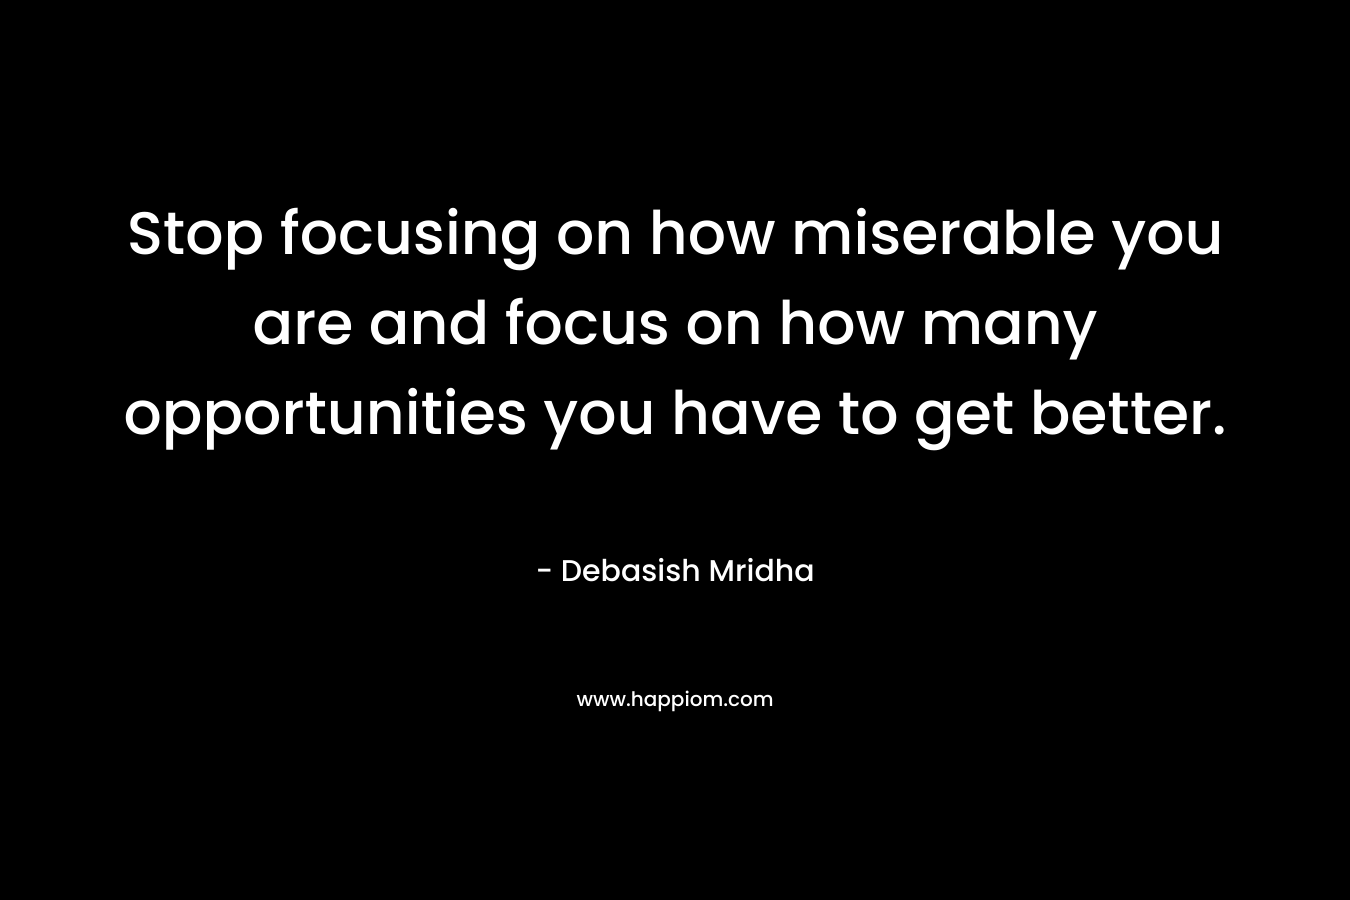 Stop focusing on how miserable you are and focus on how many opportunities you have to get better.